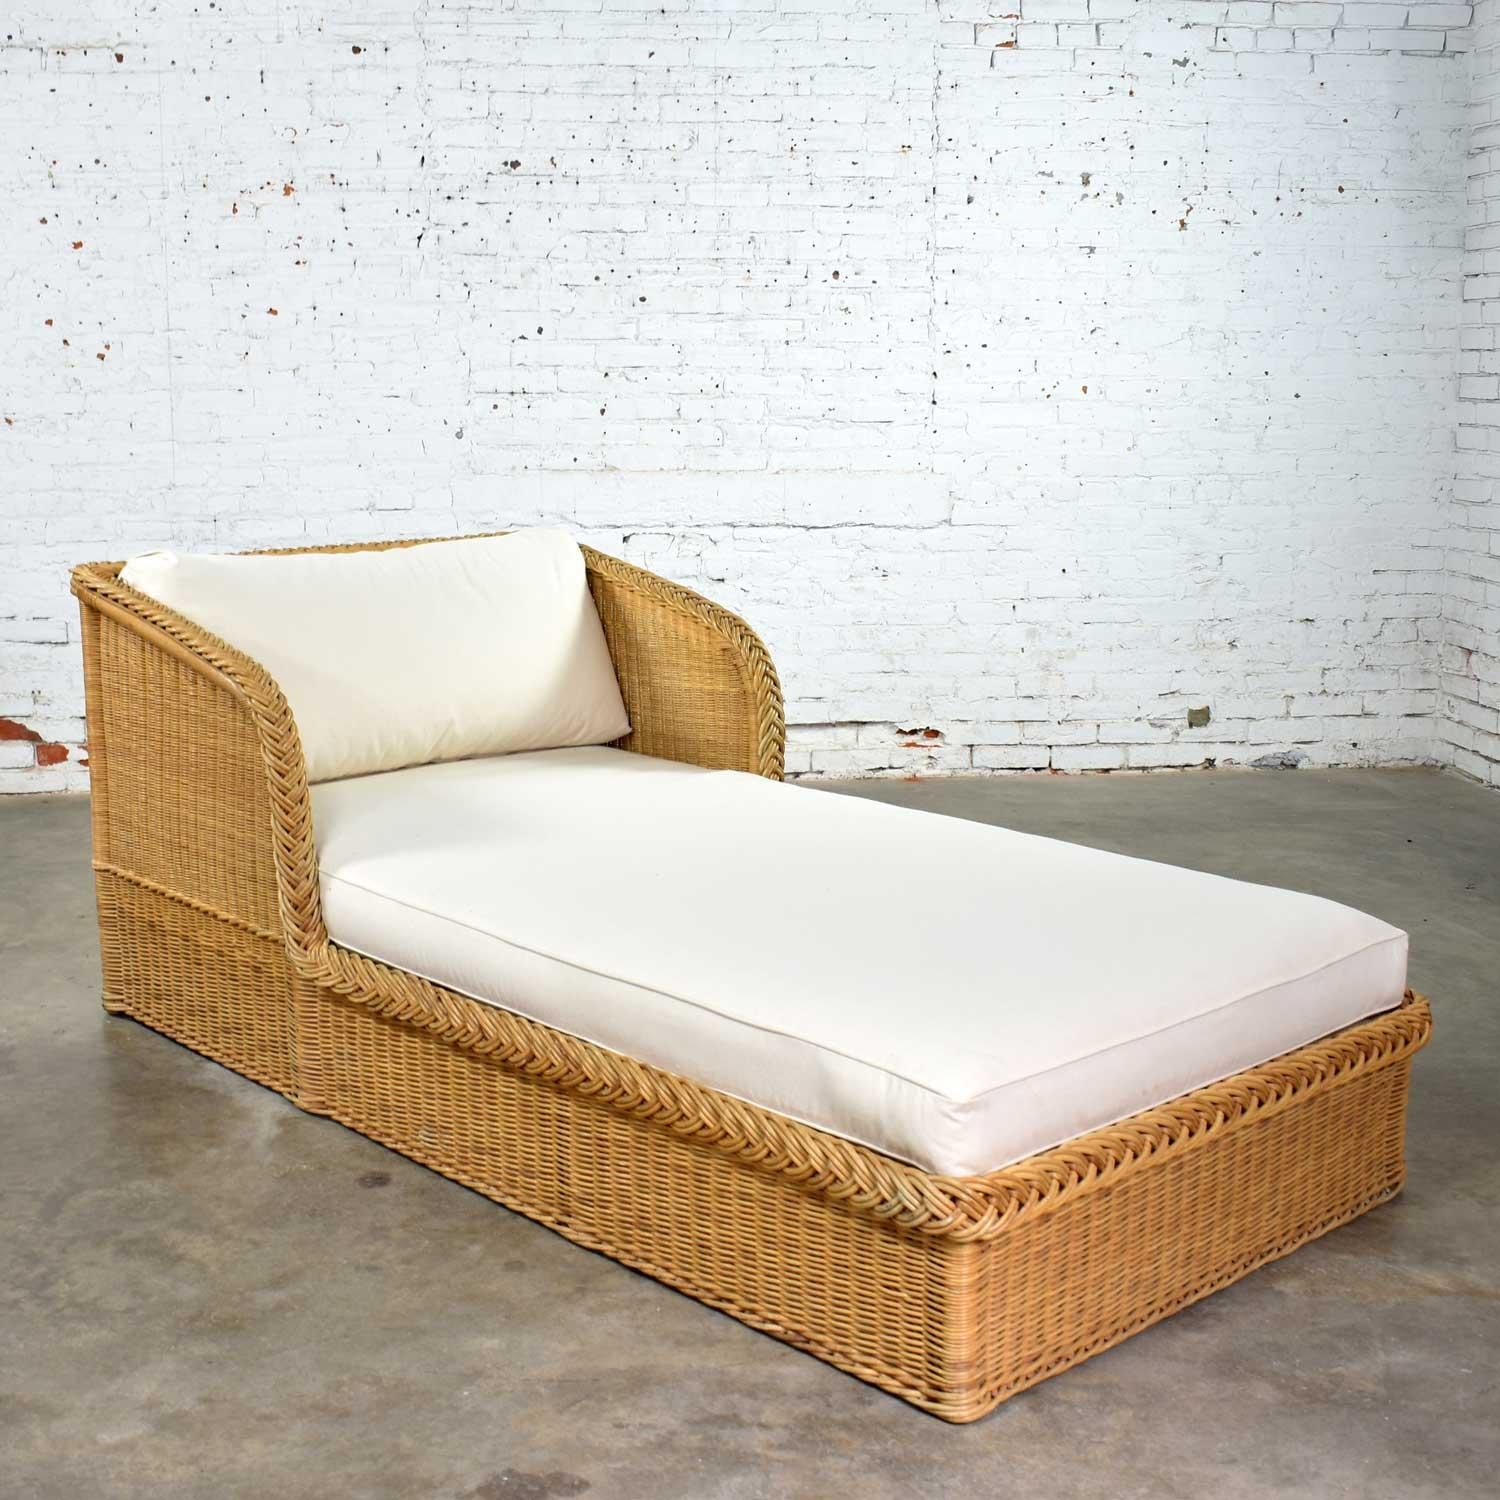 Organic Modern Wide Rattan Wicker Chaise by Bielecky Brothers, Inc. New White Canvas Upholstery